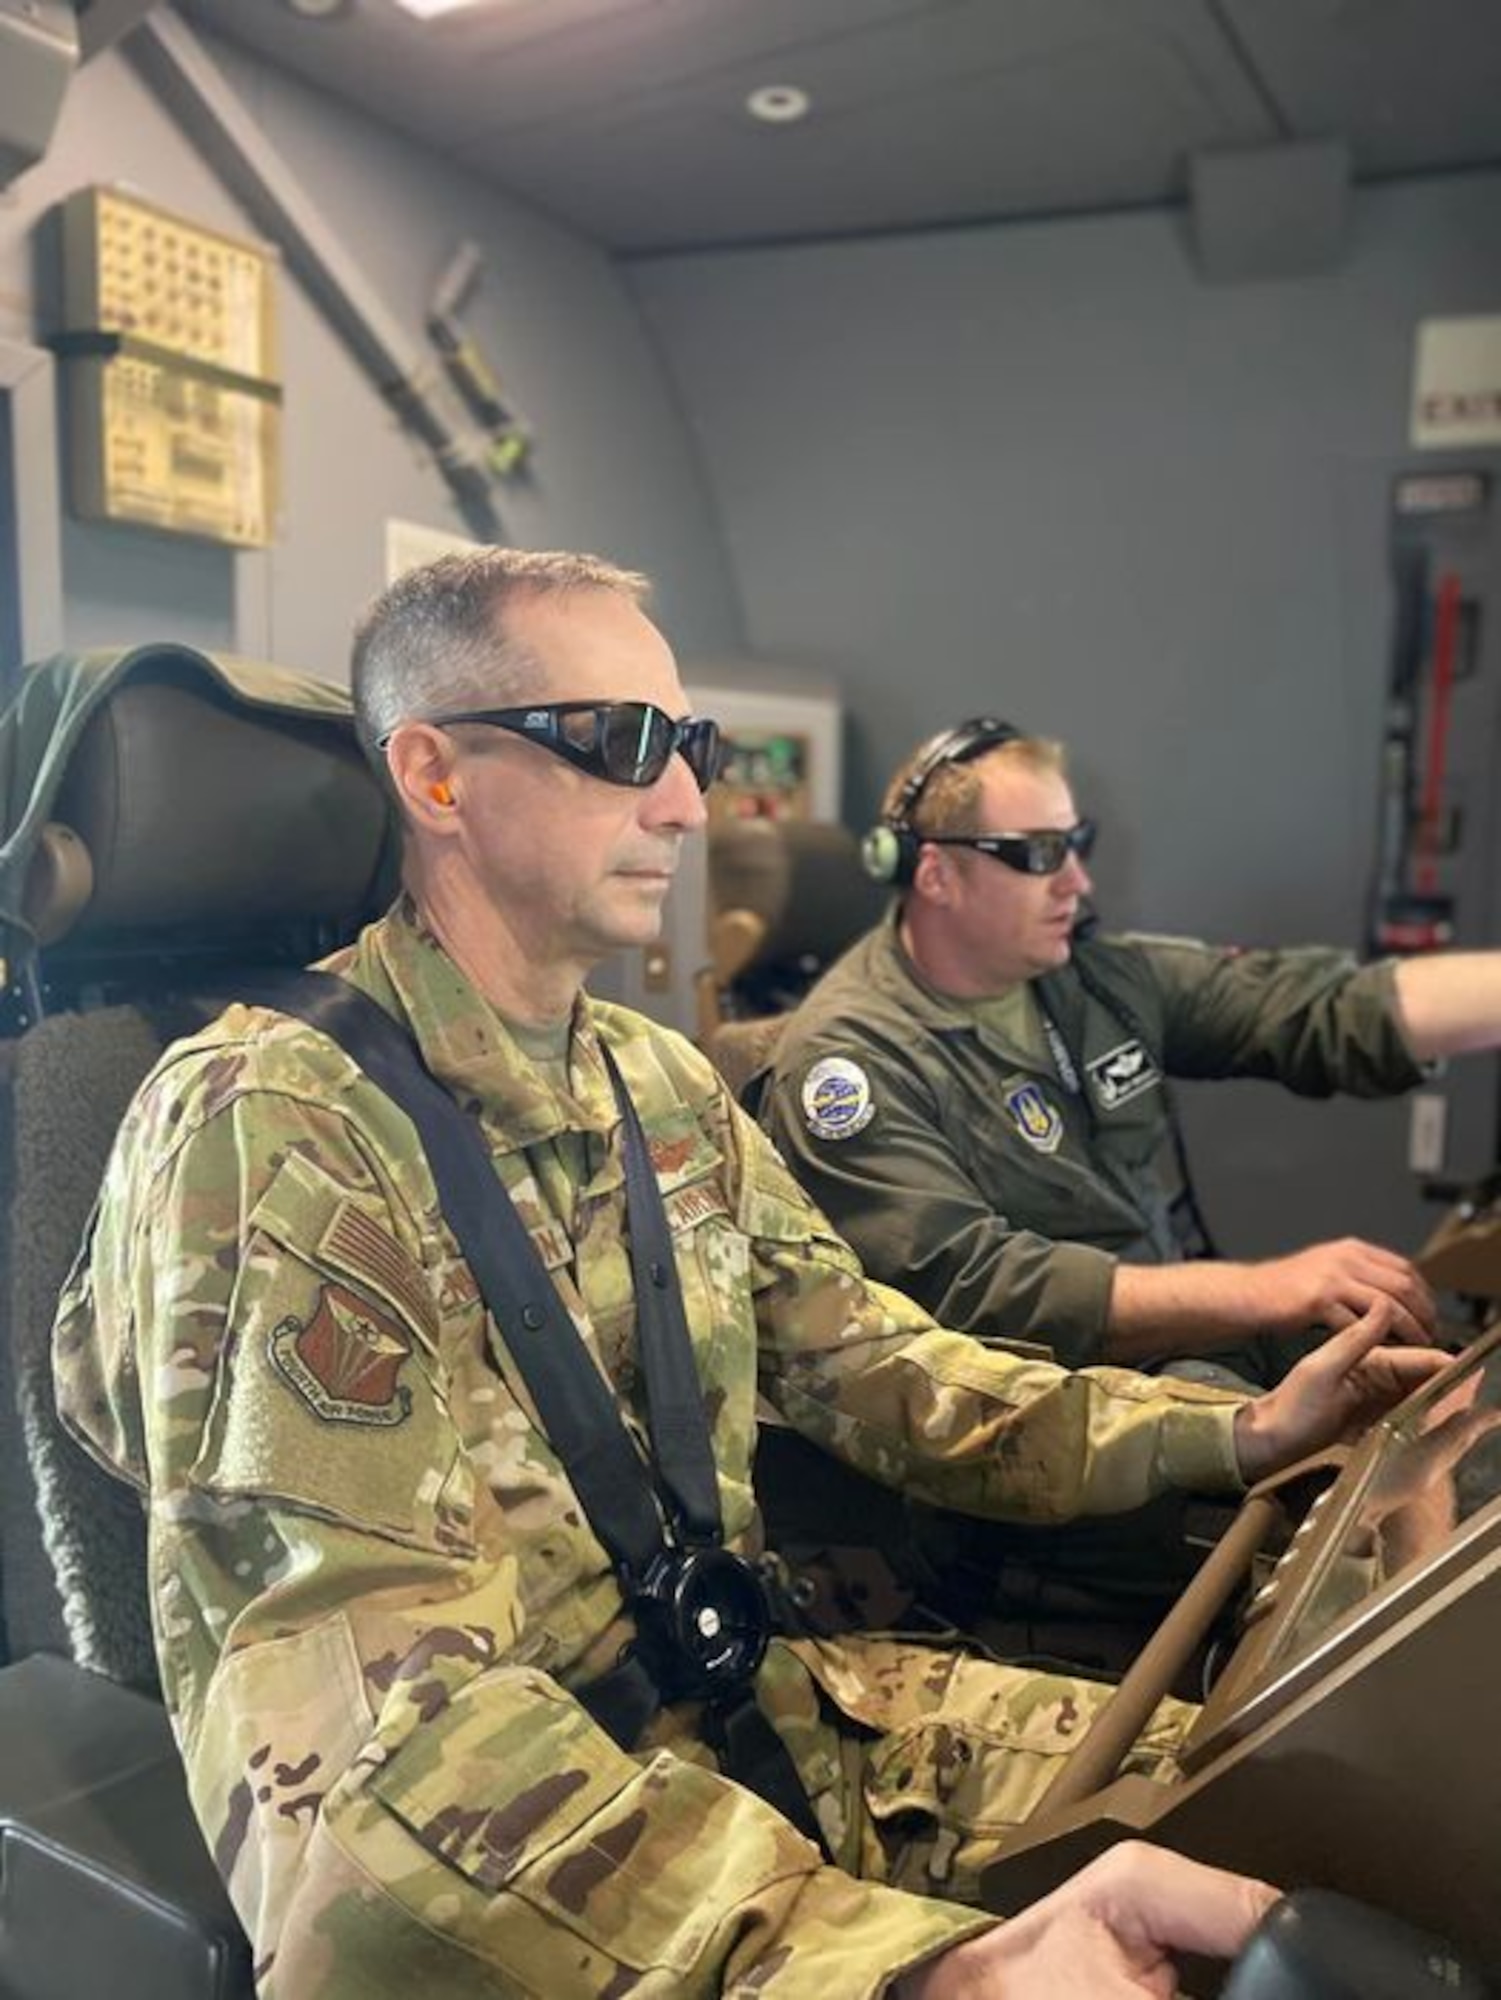 Squadron commanders from several bases attended a course at MAFB